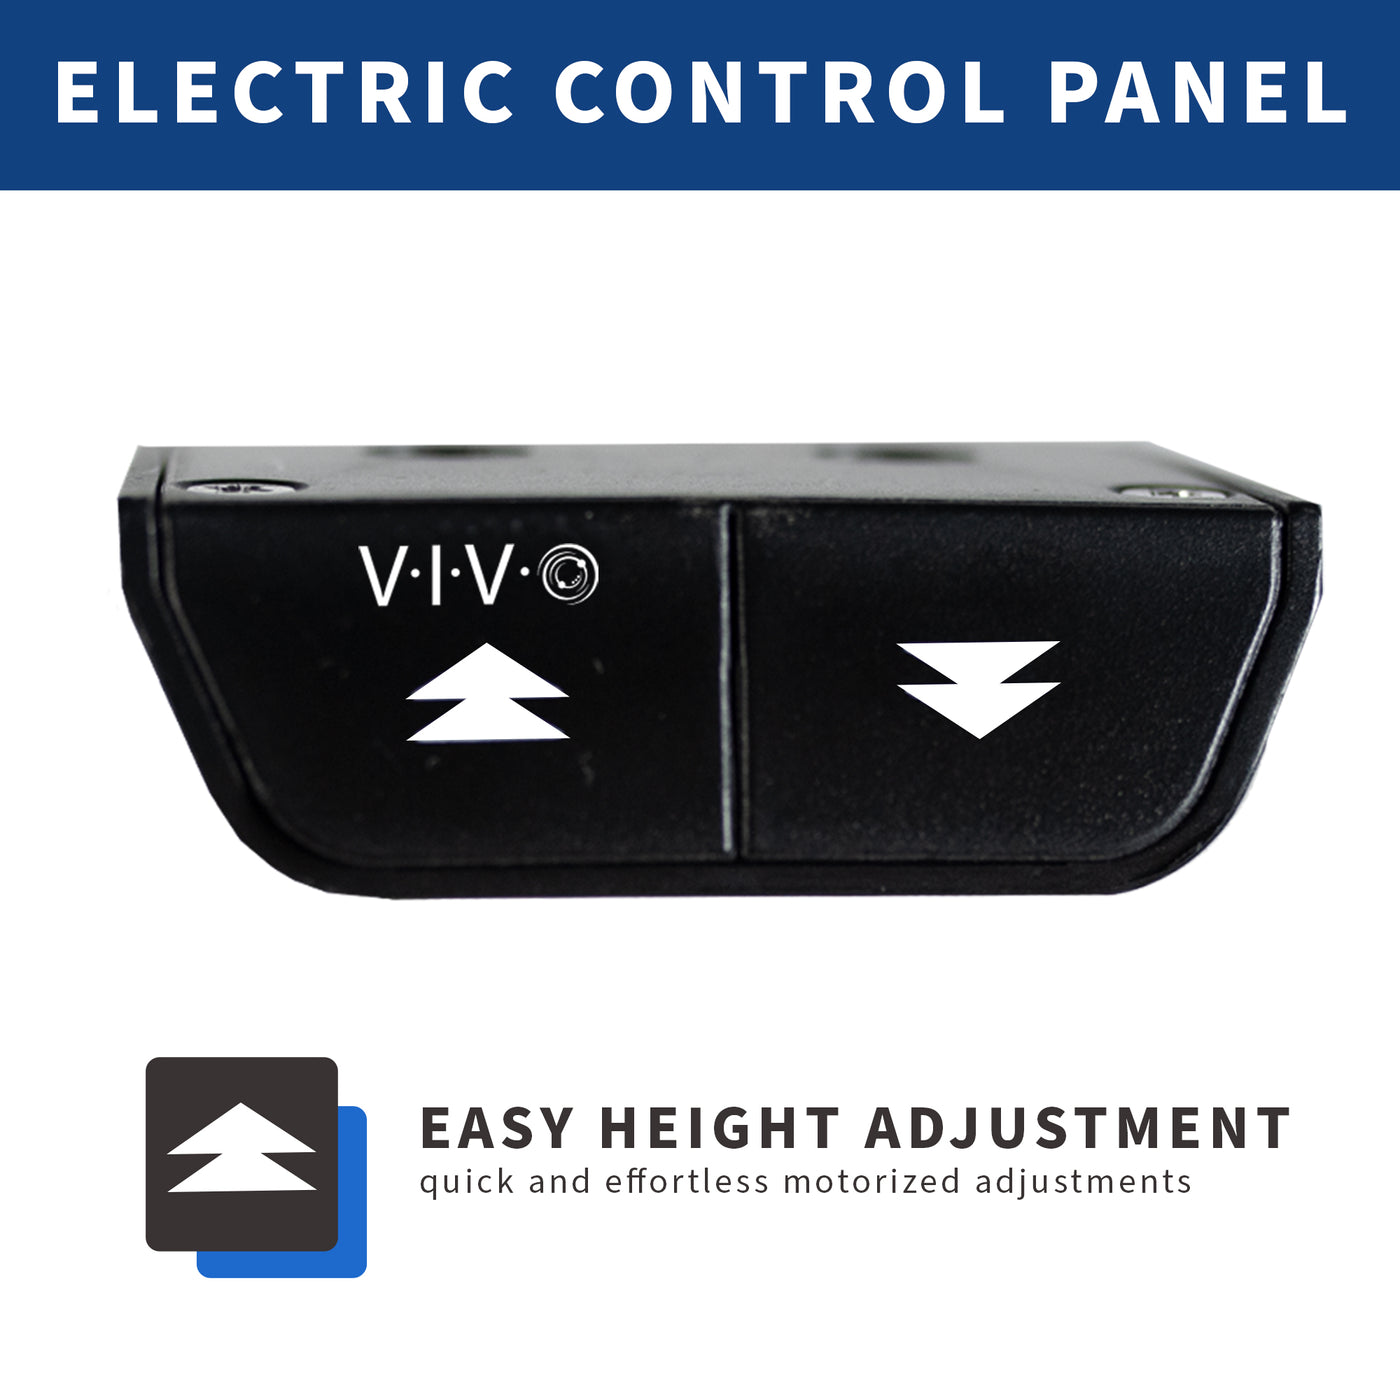 Electric control panel for easy and convenient height adjustments.